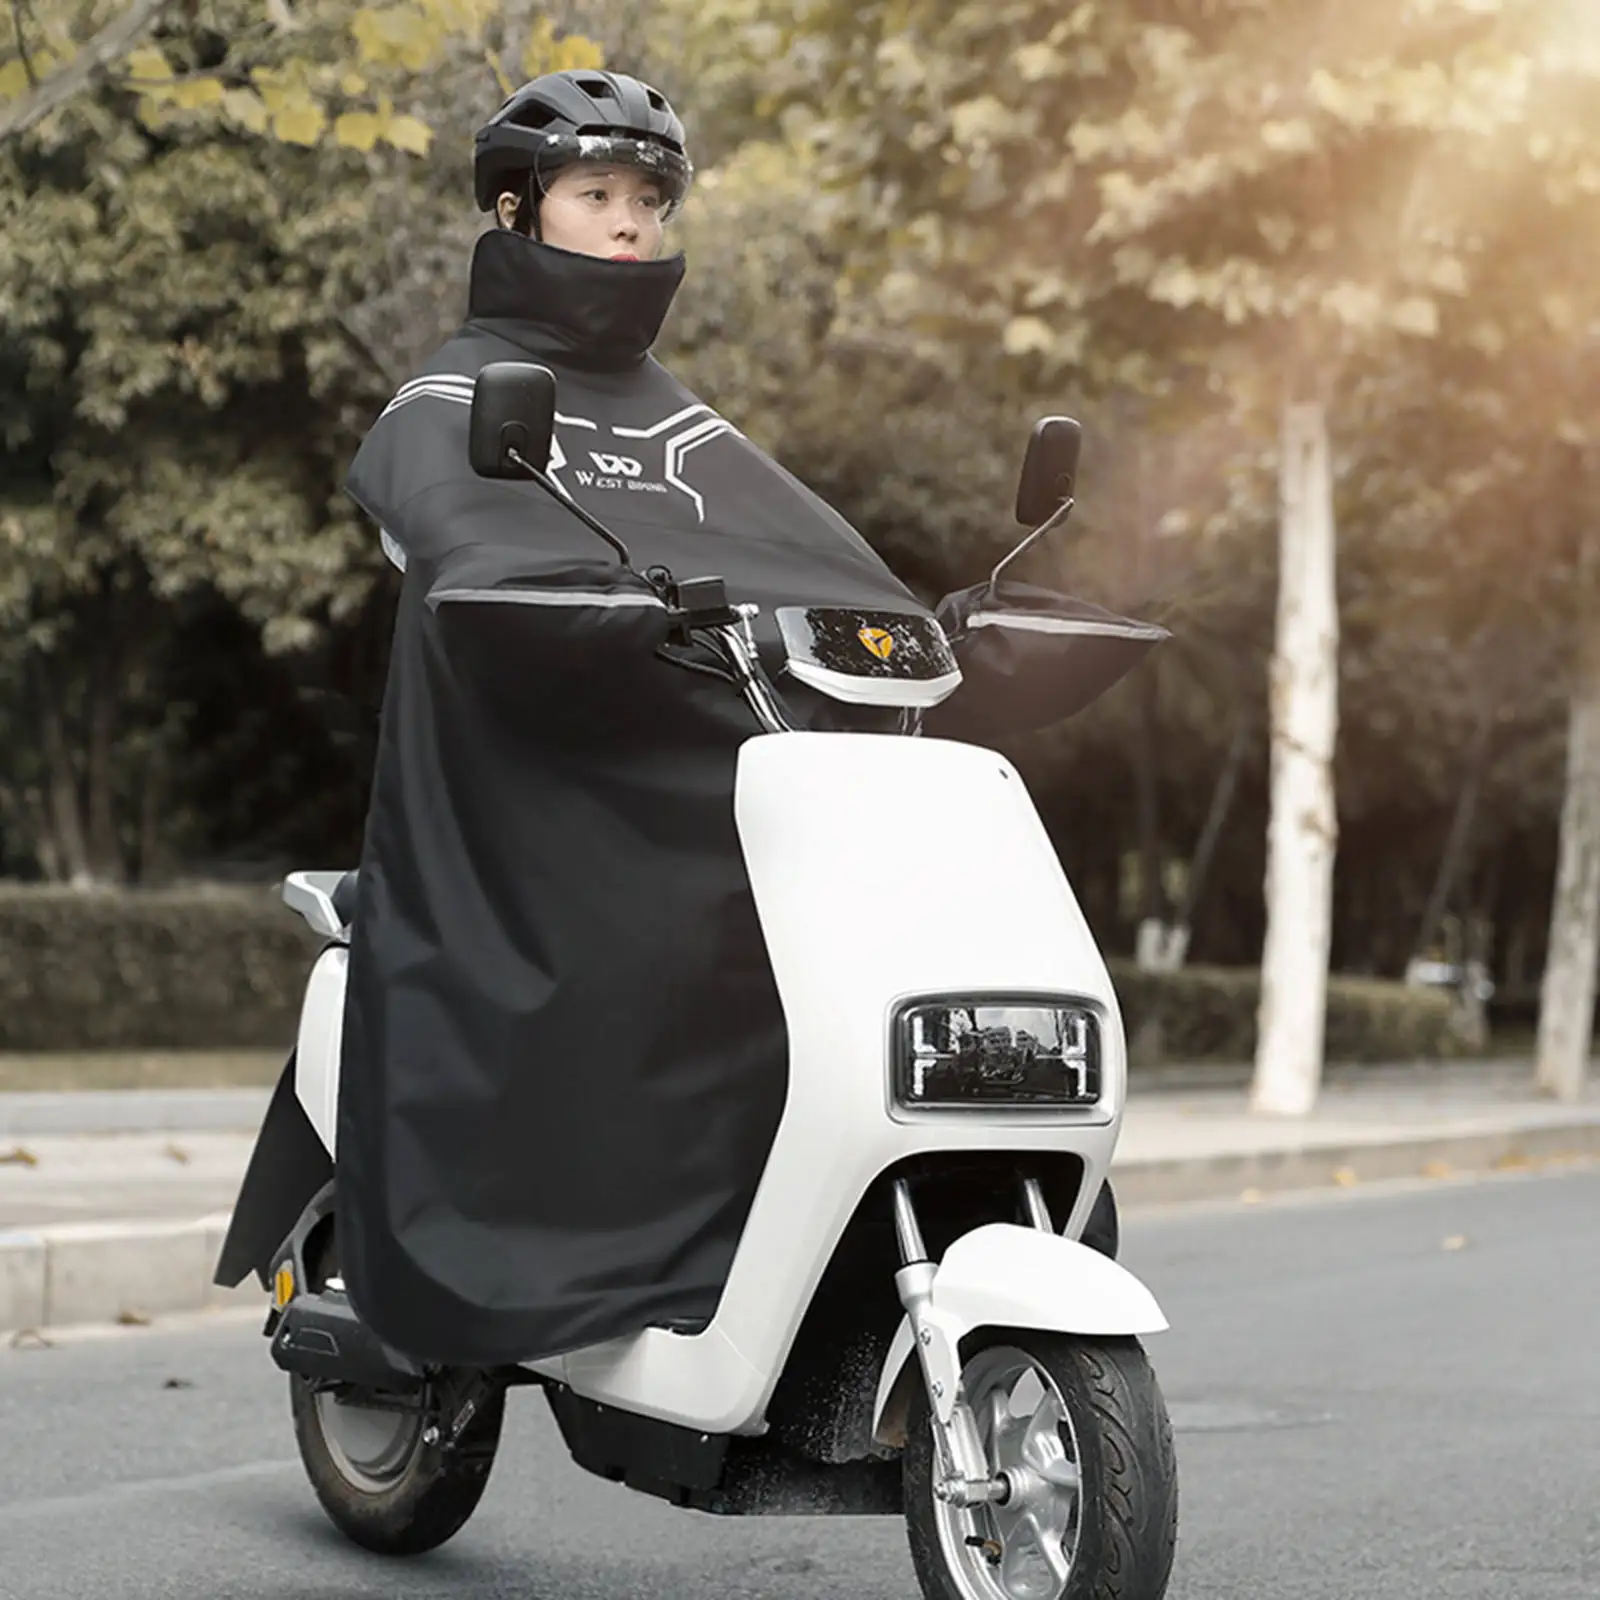 Greatideal Leg Lap Apron Cover,velvet Waterproof Windproof Leg Cover Wear-resistant Scooter Windshield Warm Leg Protector Quilt With Elastic Band,for Cold And Warm Scooter Electric Cars 